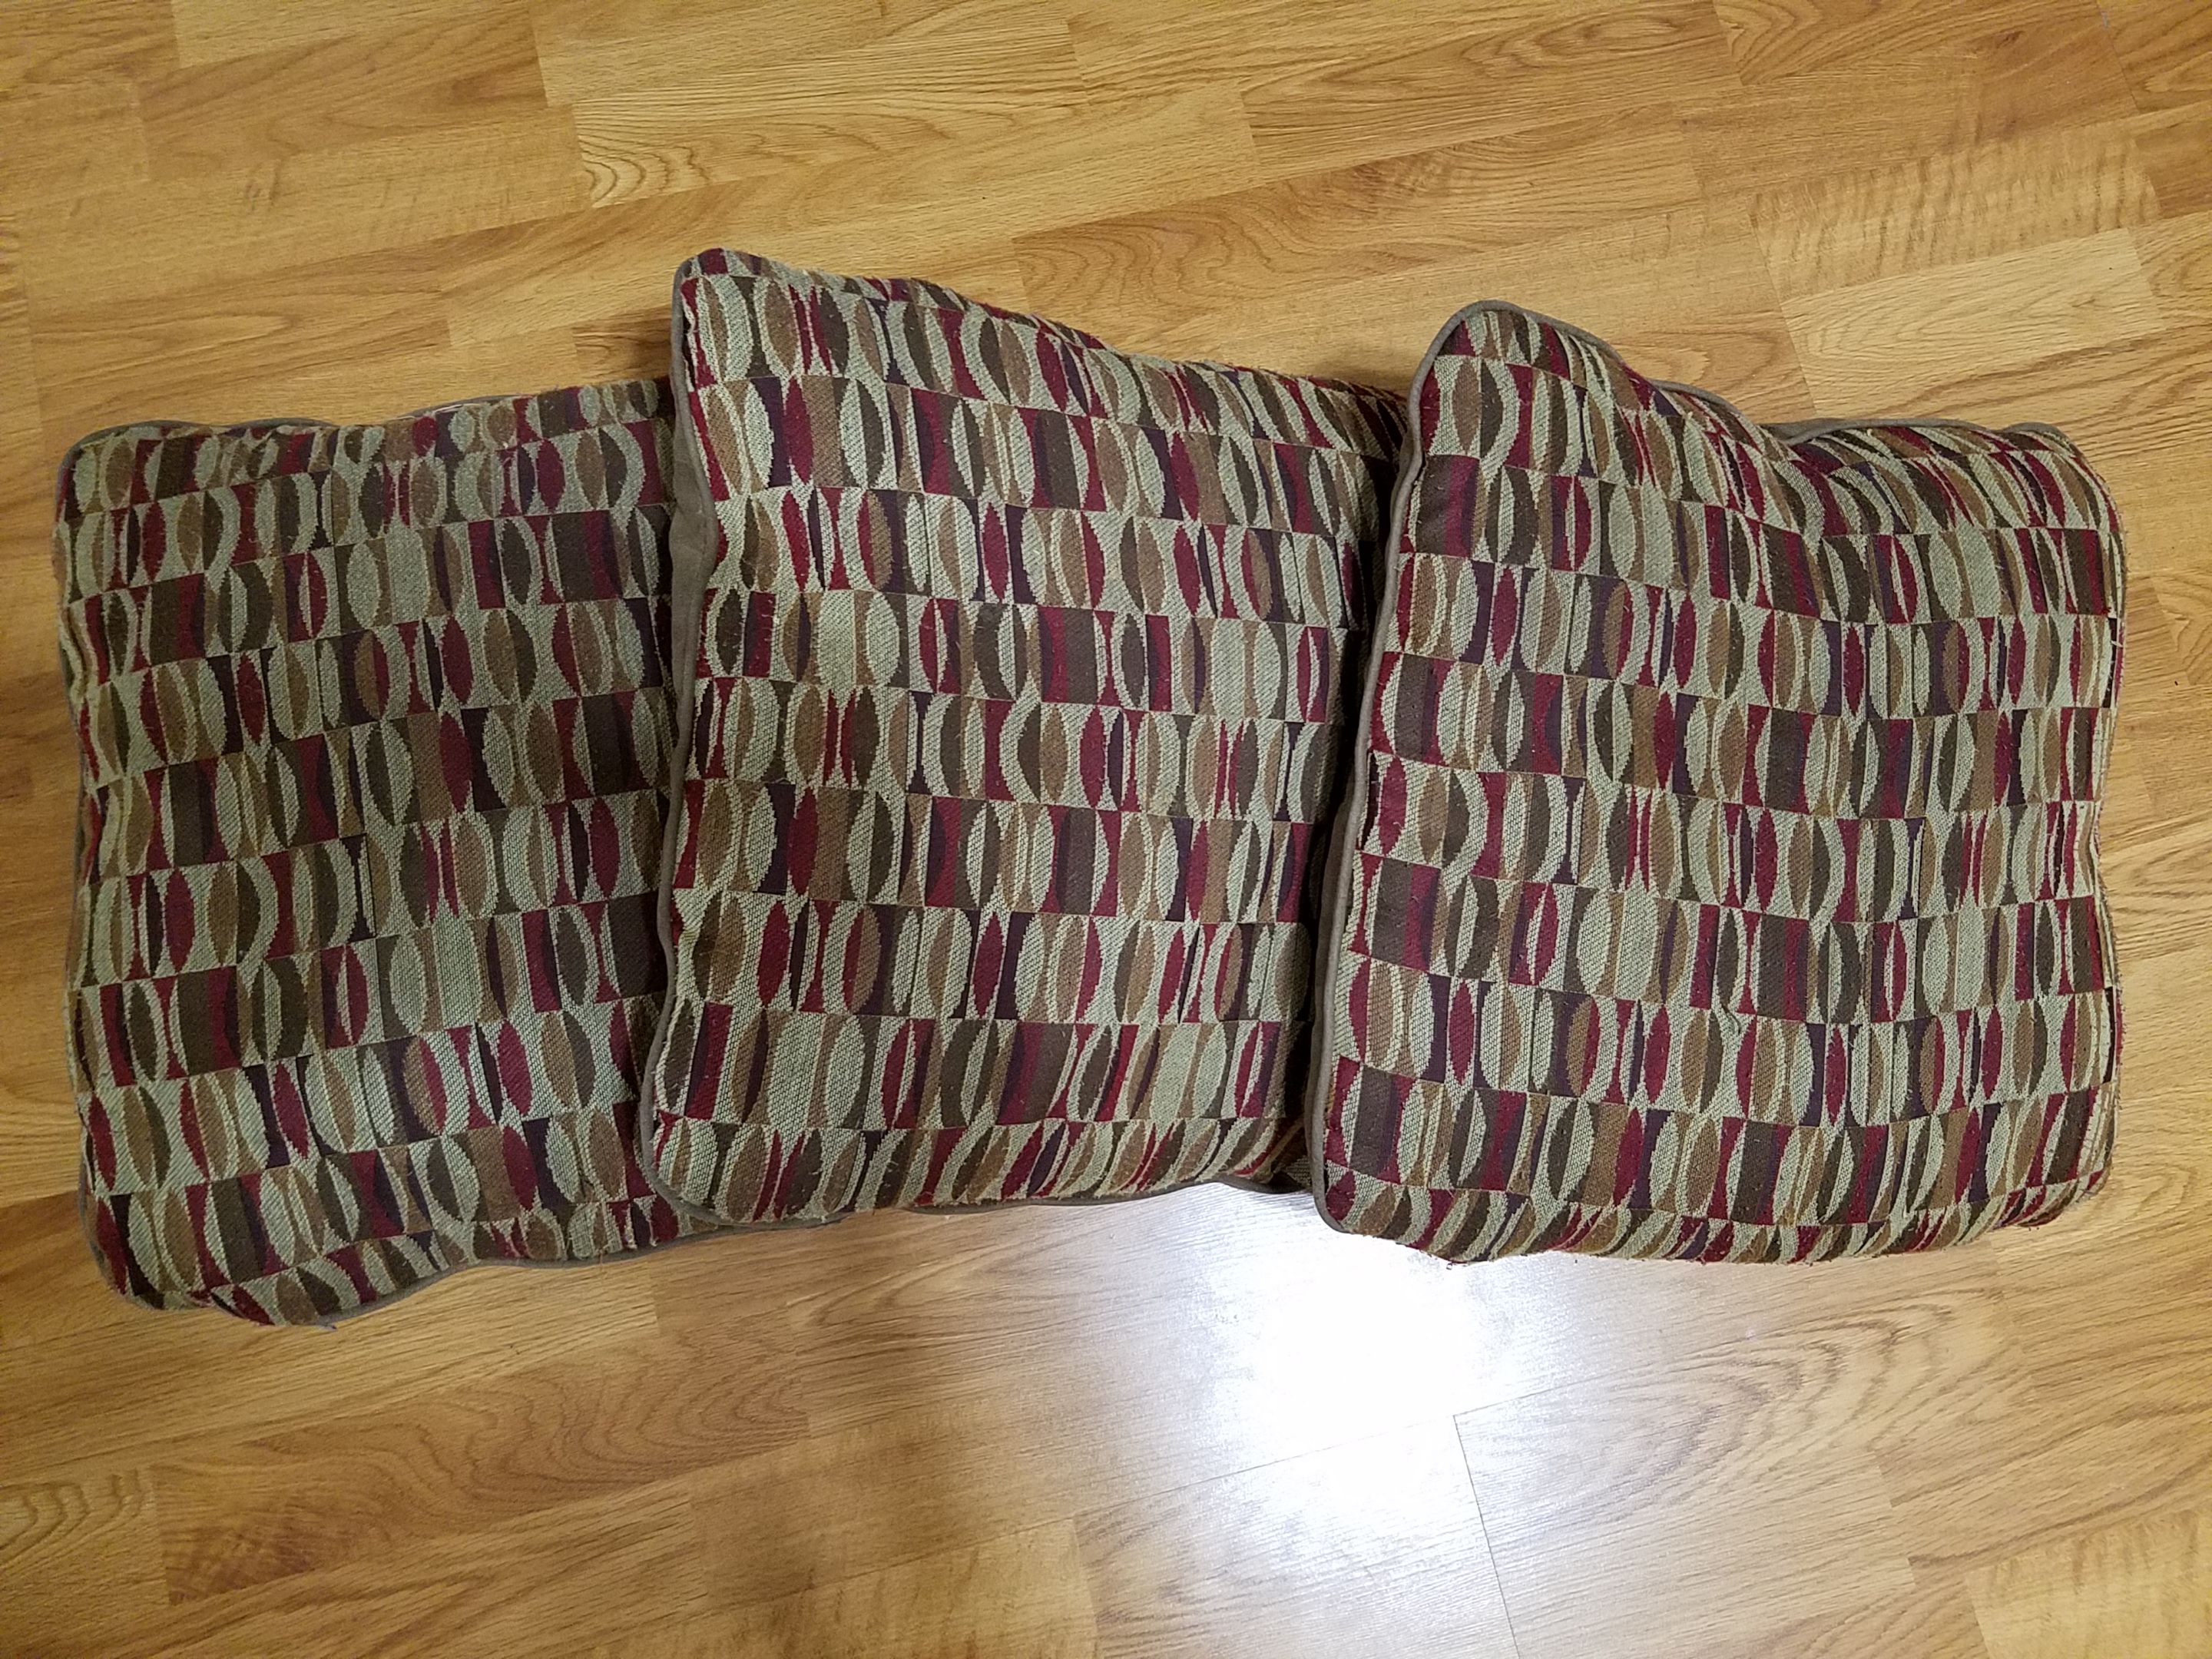 3 couch throw pillows